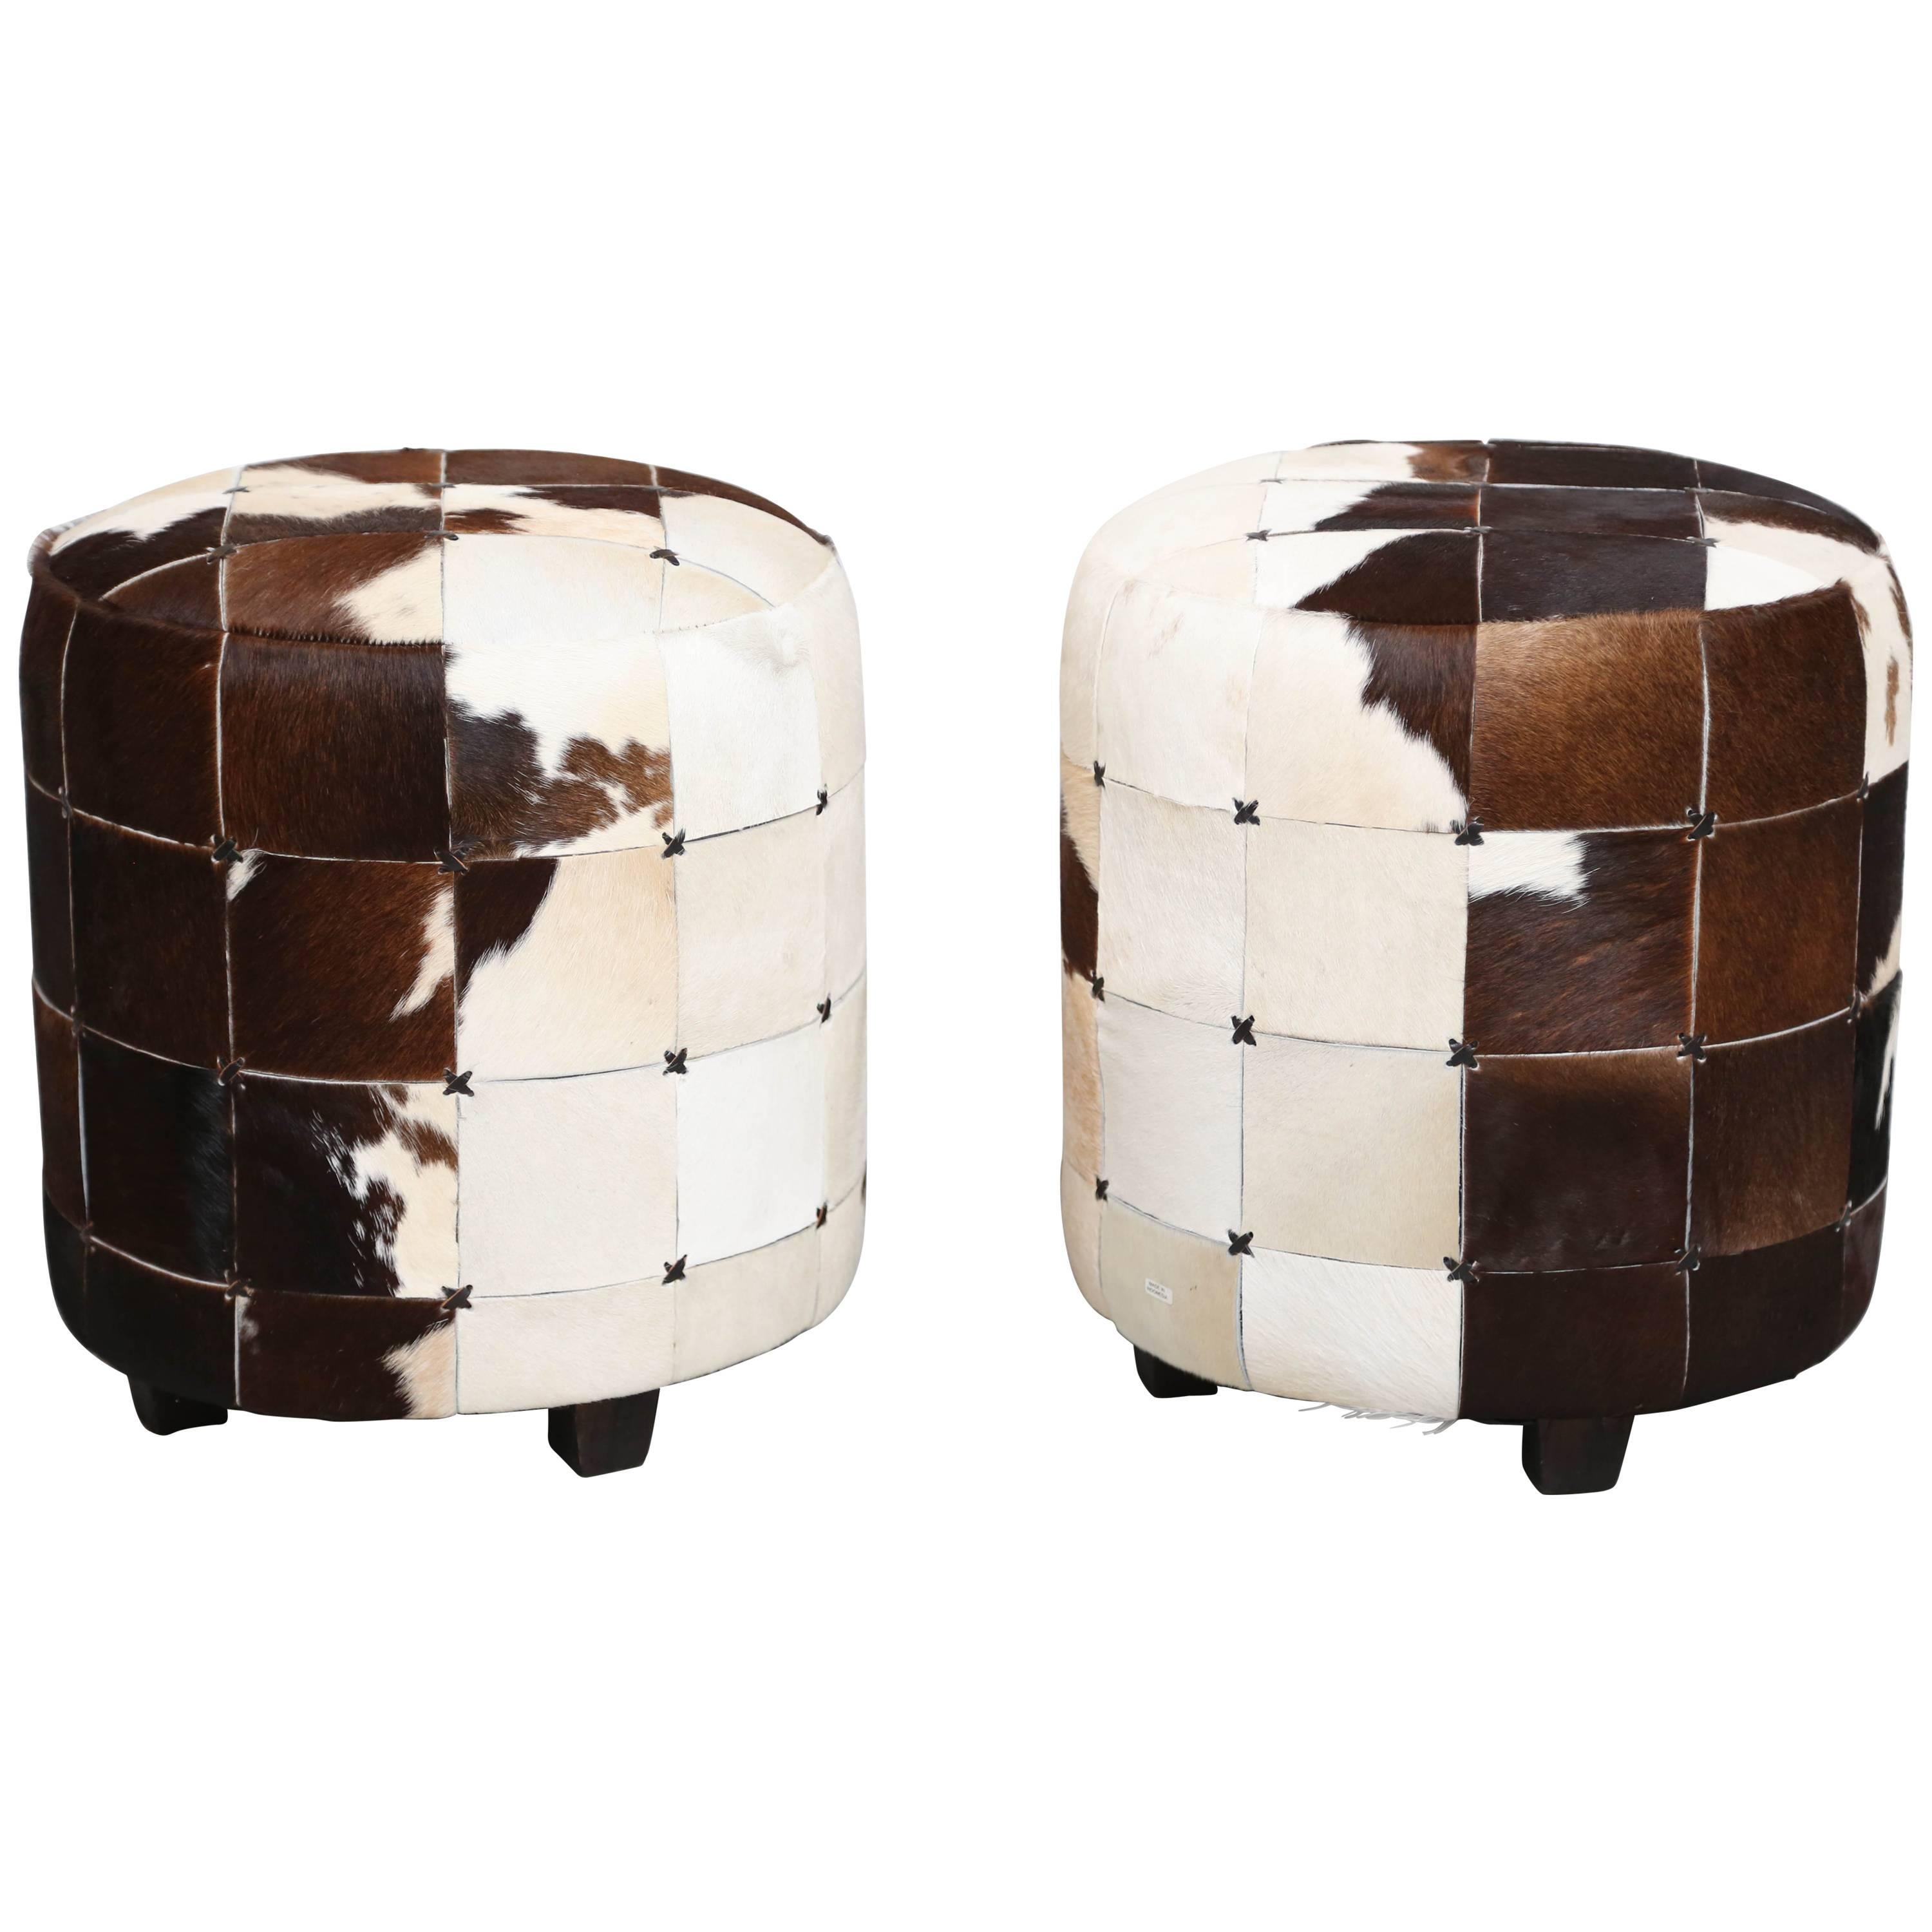 Pair of Cowhide Ottomans or Footstools, Super Chic